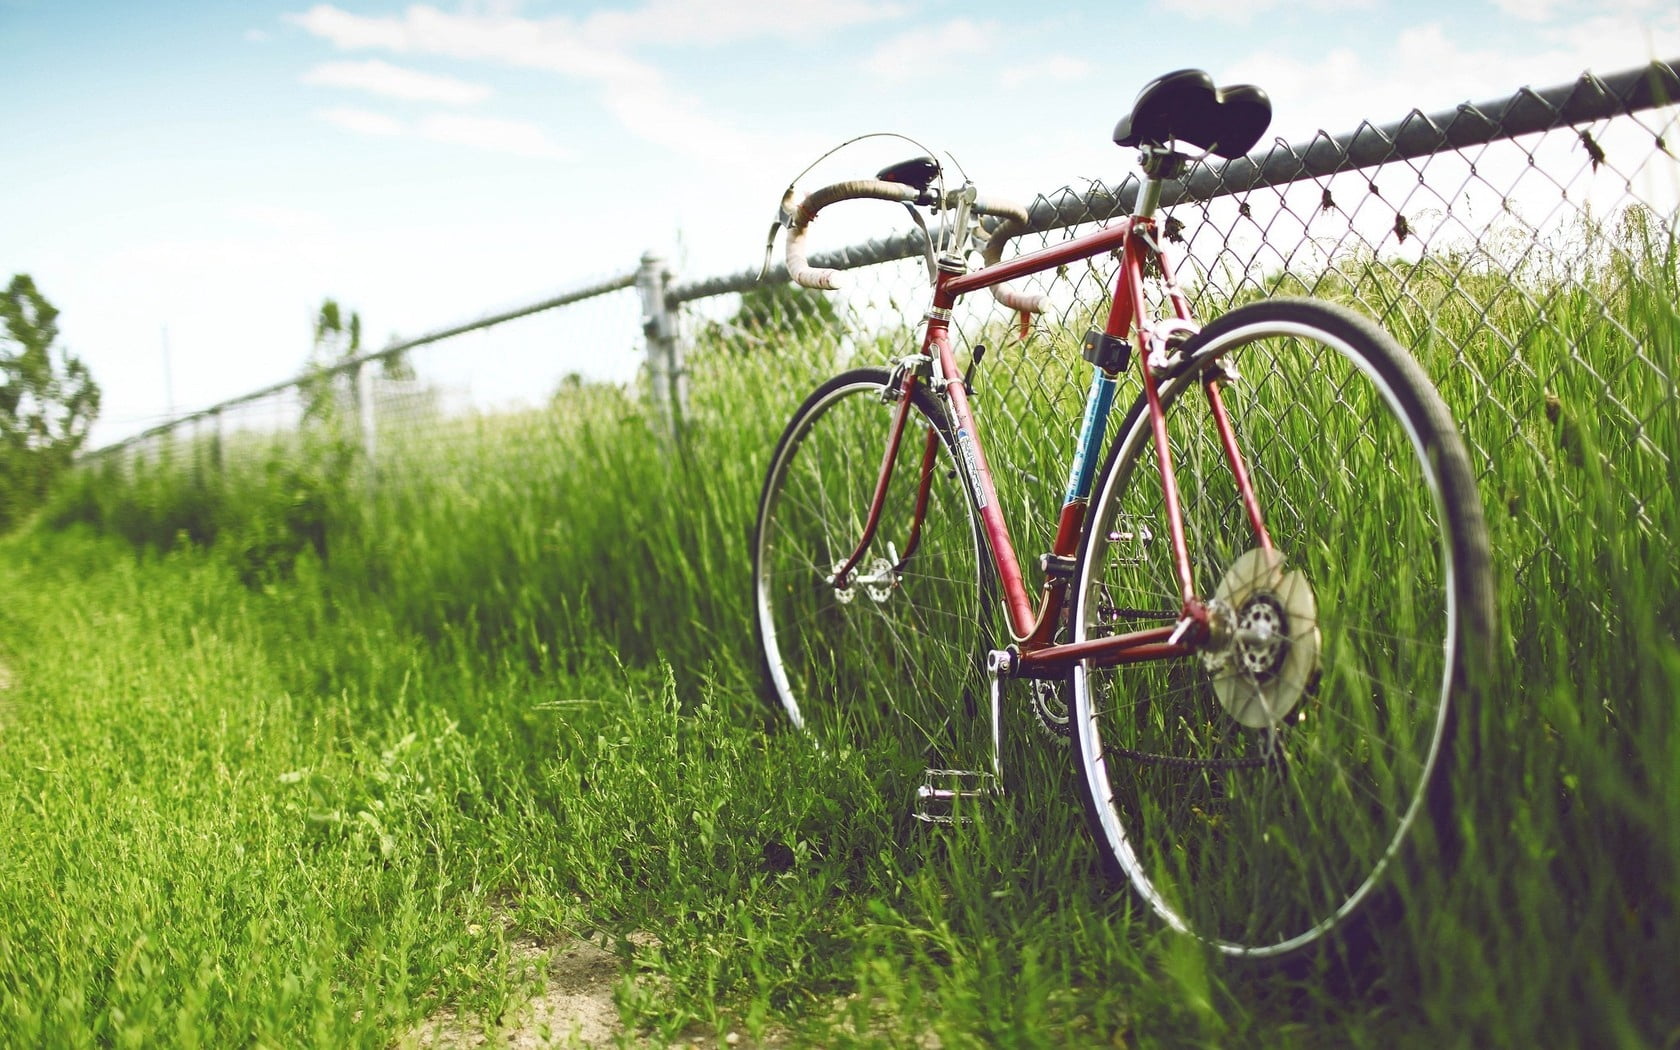 red and black road bike, bicycle, fence, field, grass, summer